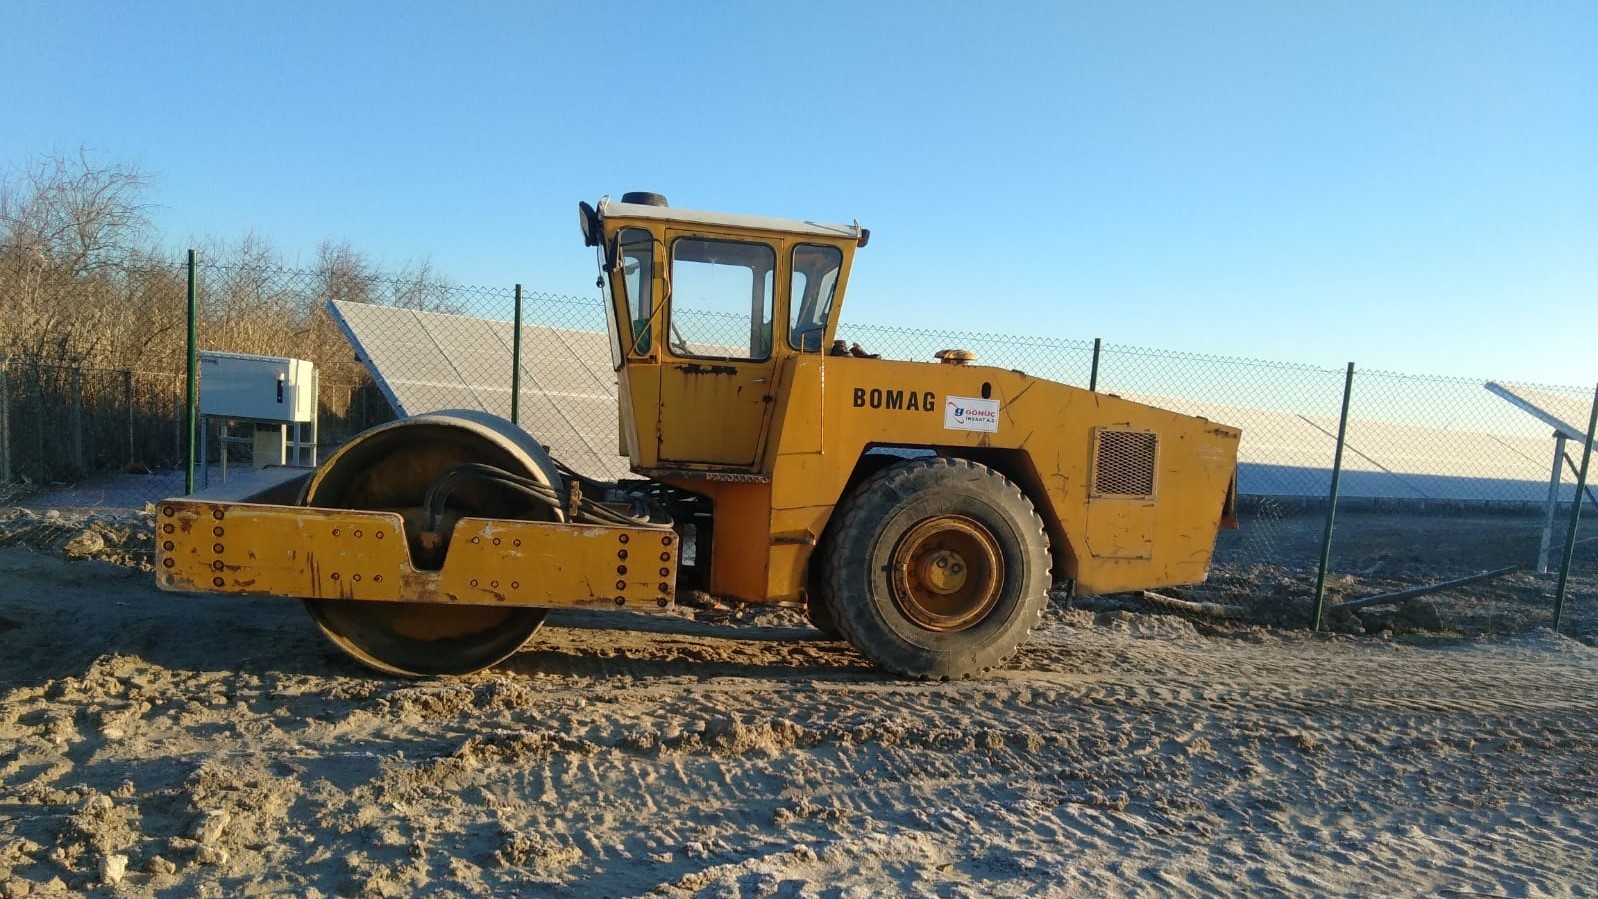 soil compaction using a road roller